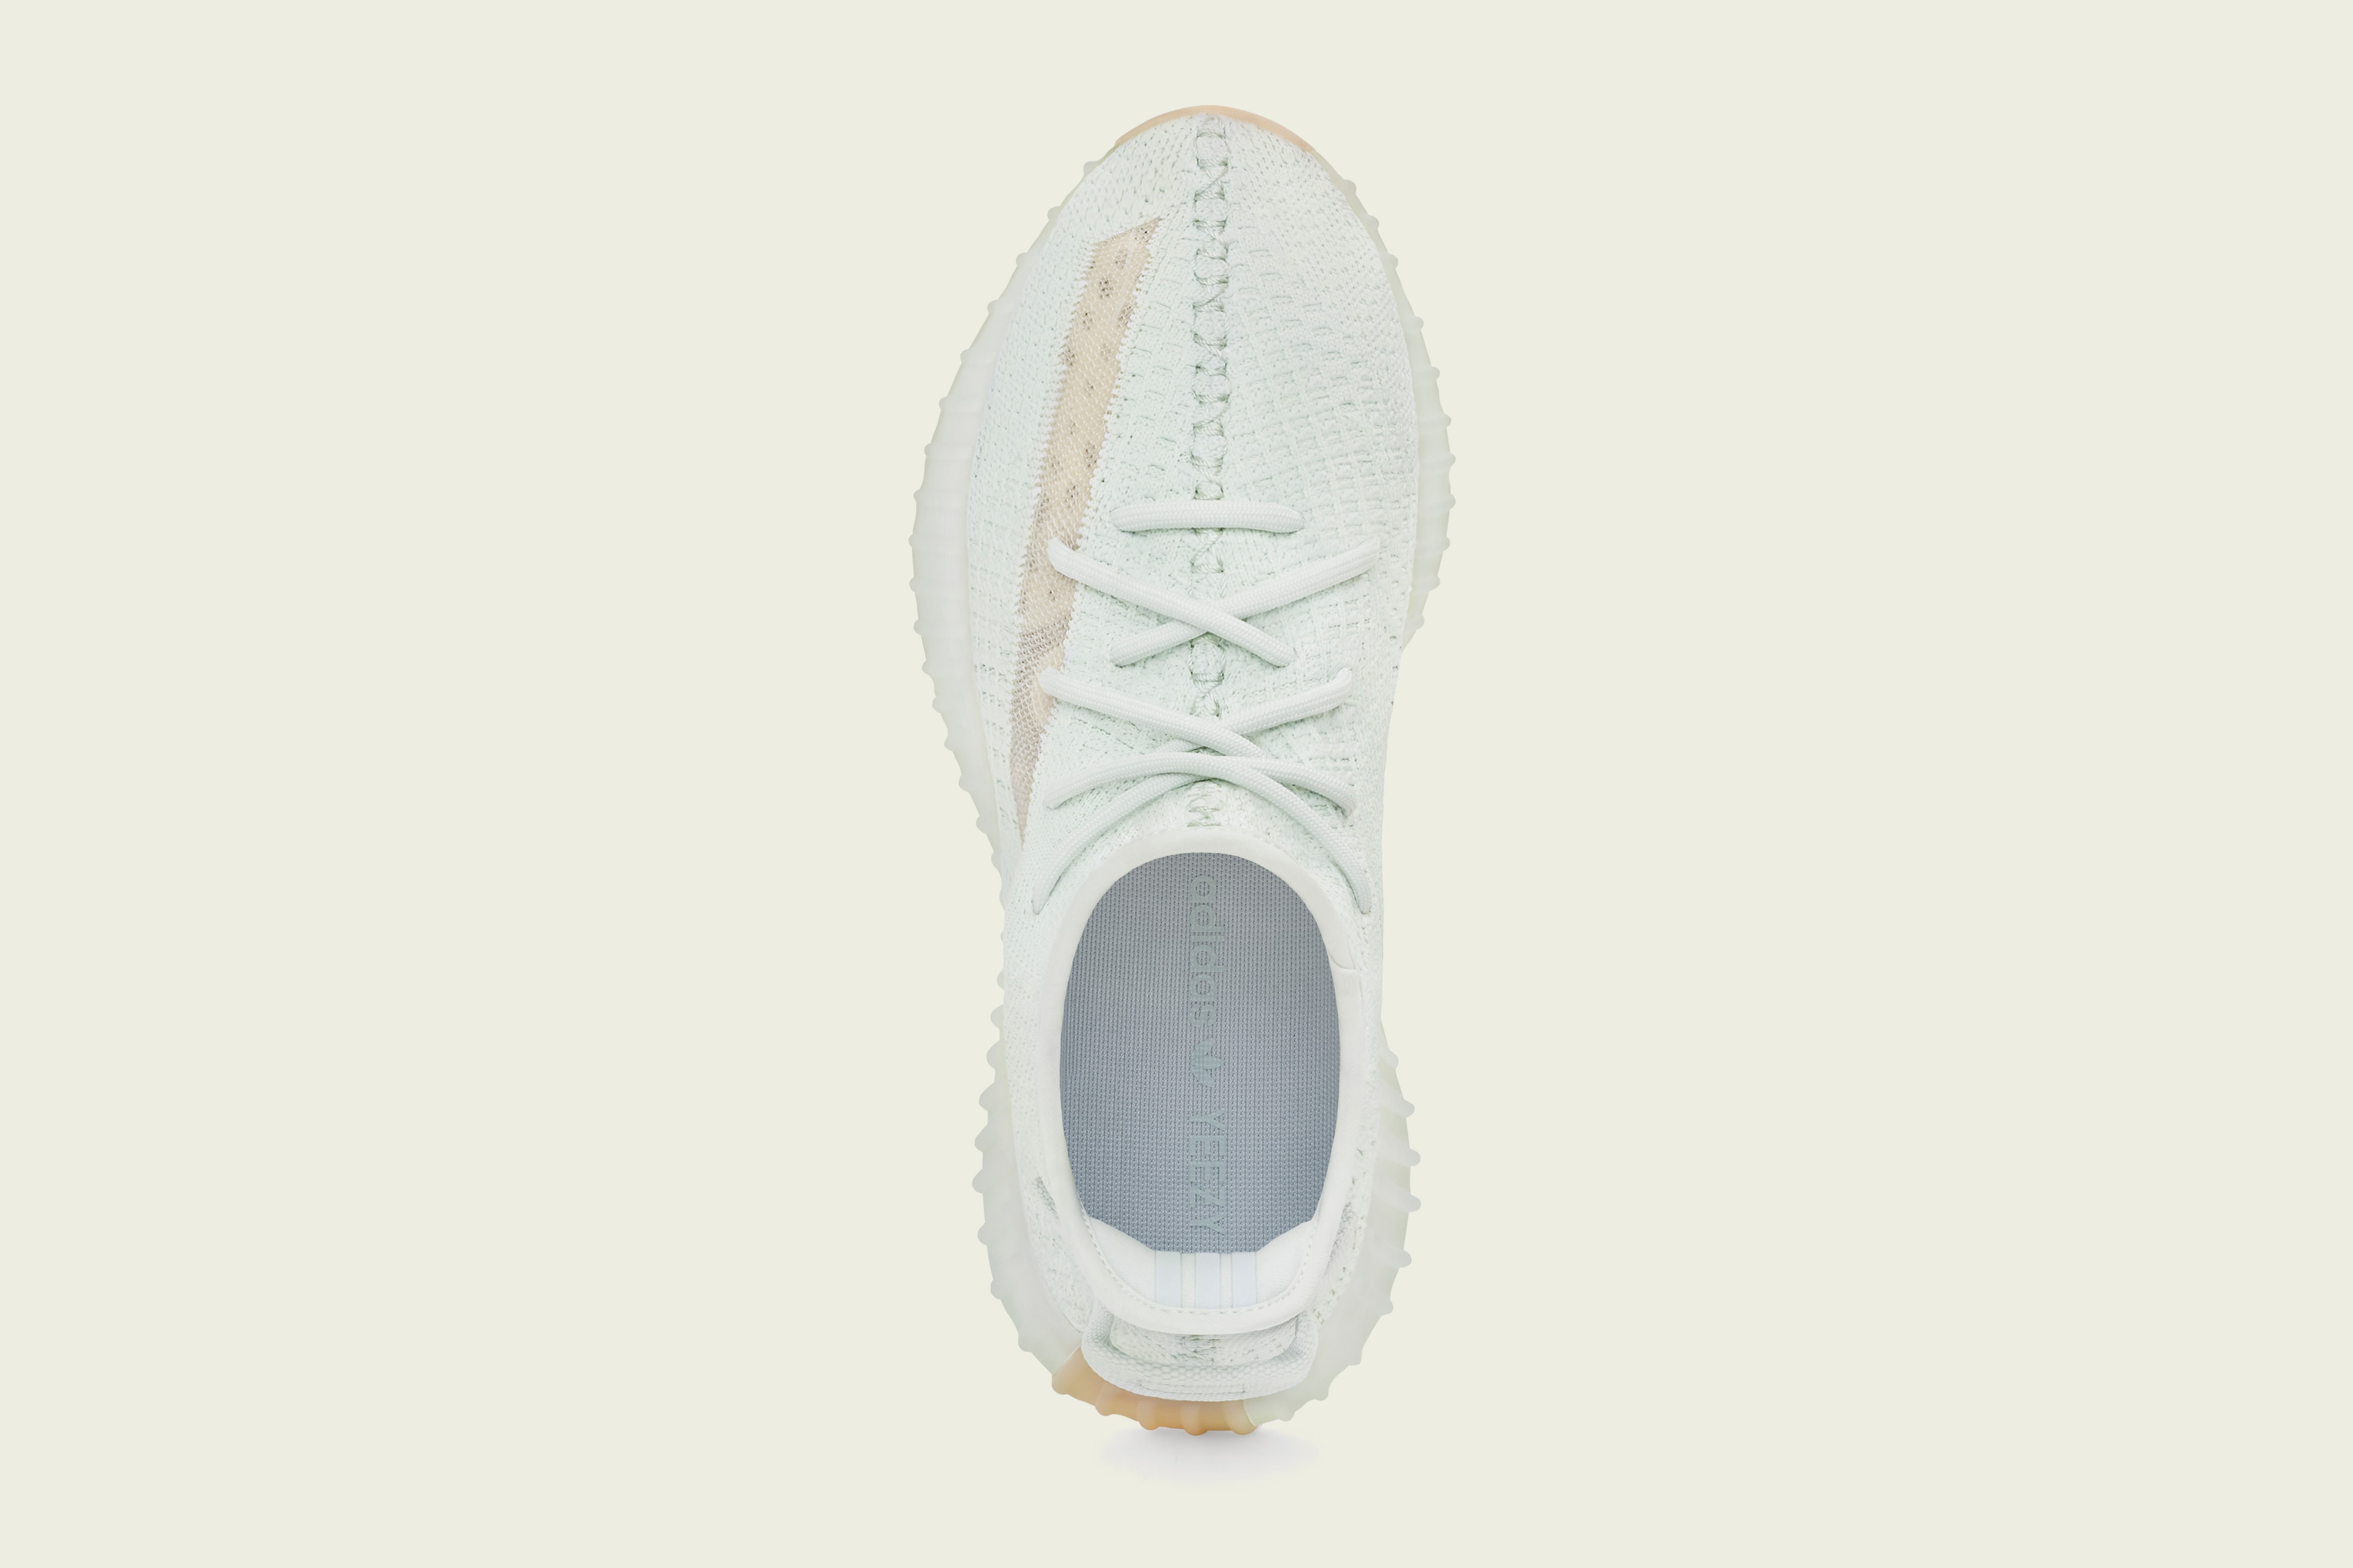 adidas Originals YEEZY BOOST 350 V2「Hyperspace」配色香港區發售情報